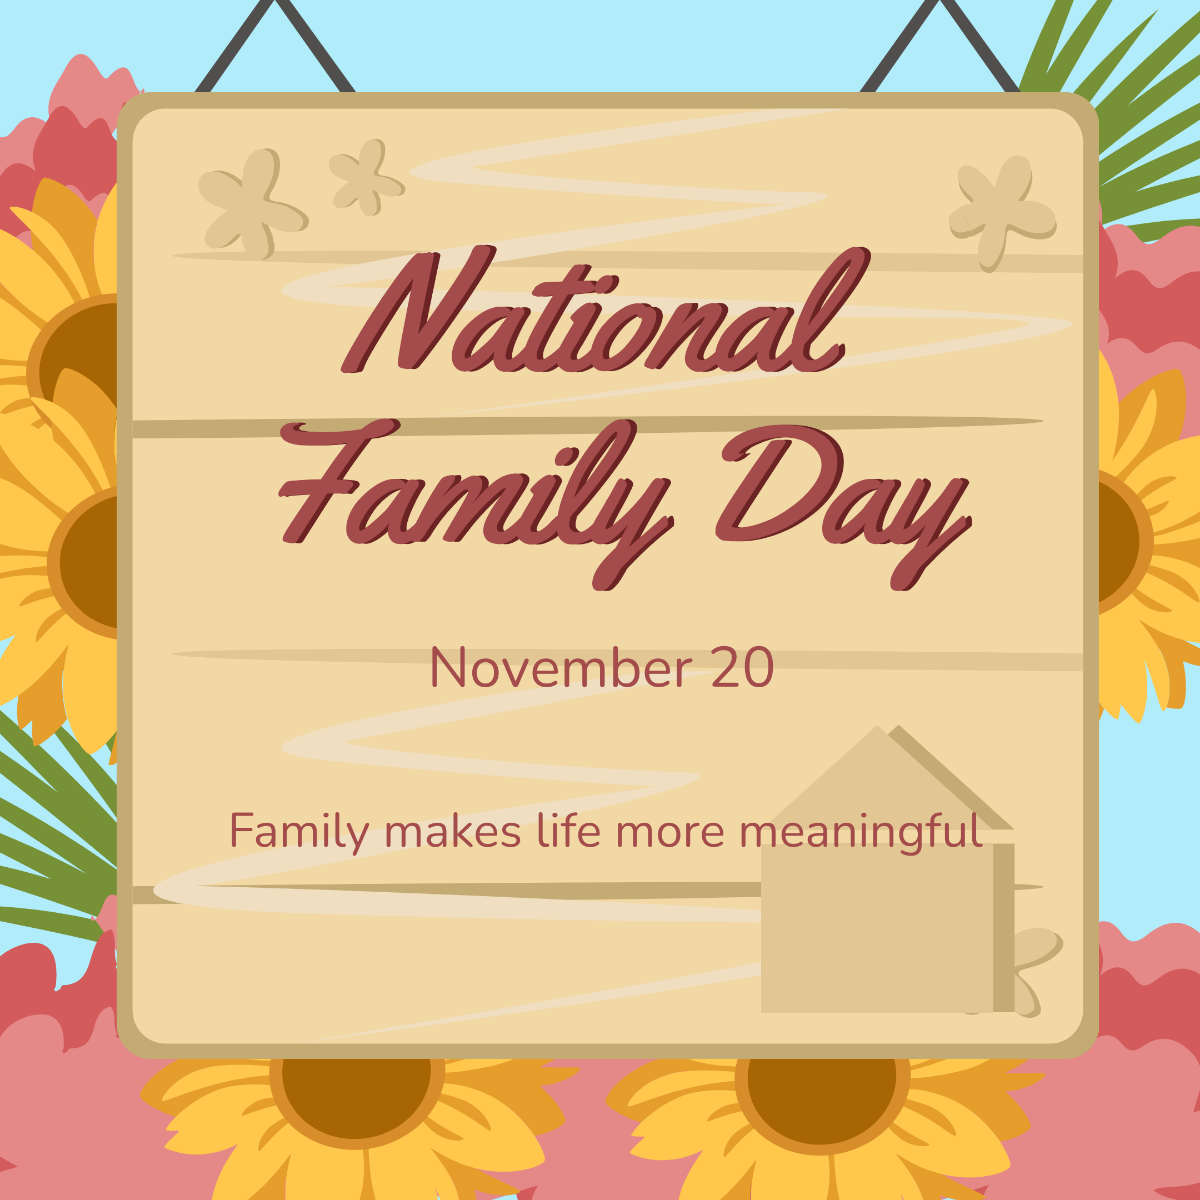 National Family Day Instagram Post Template